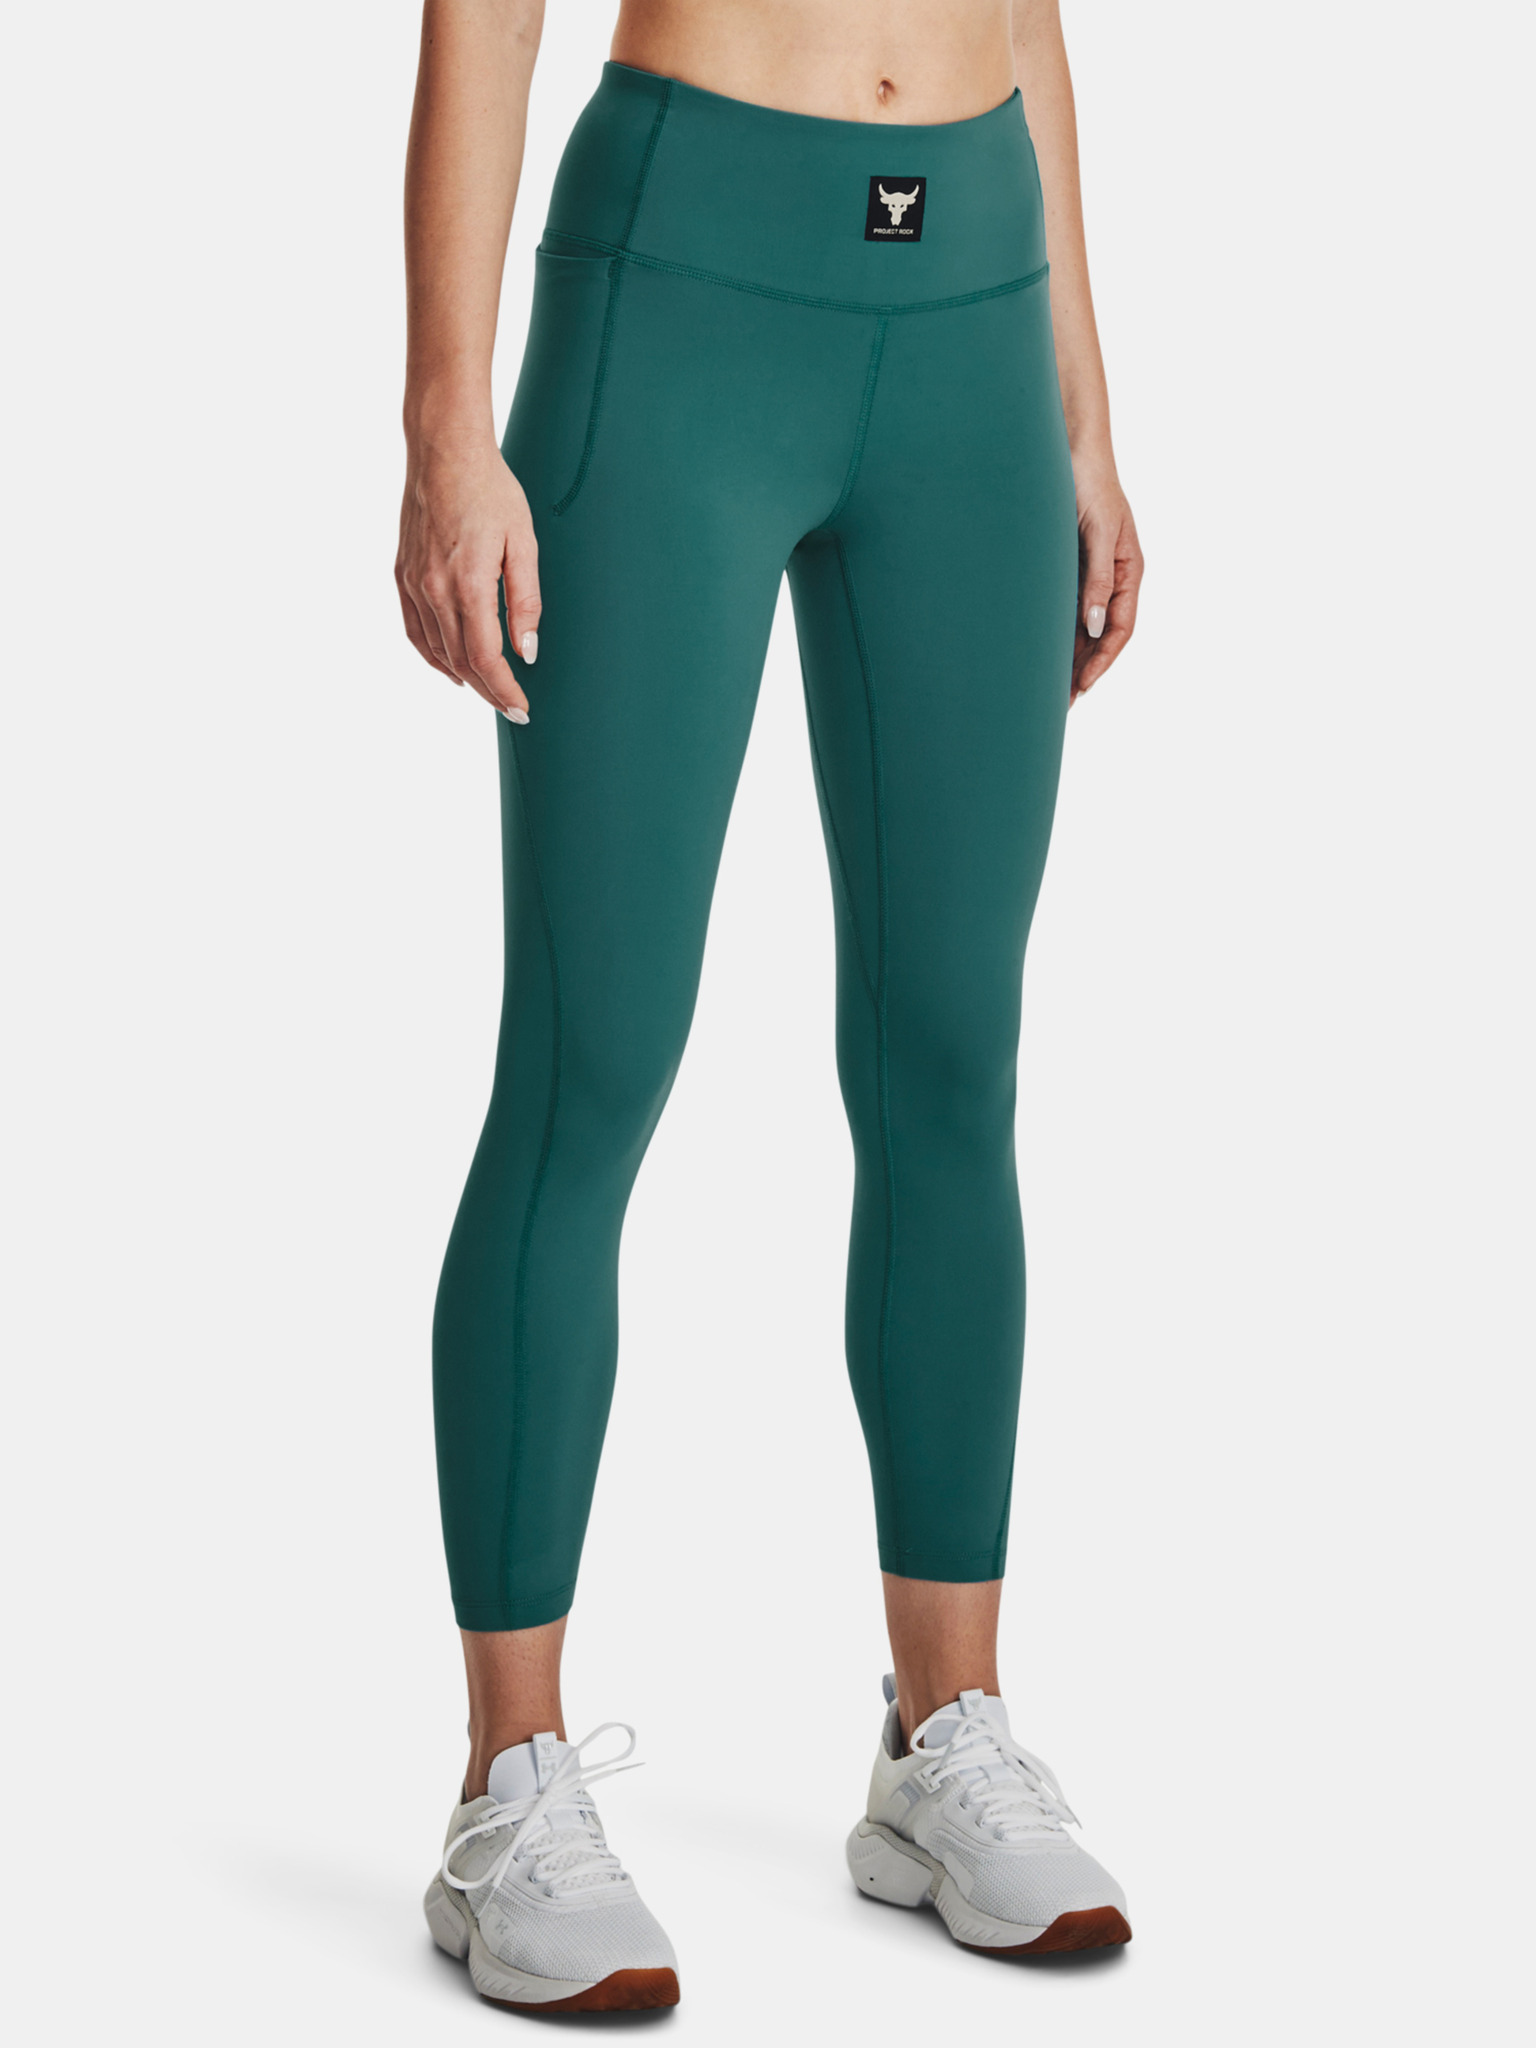 Under Armour Women's Project Rock Ankle Leggings 1361072-370 Green Size M  NWT